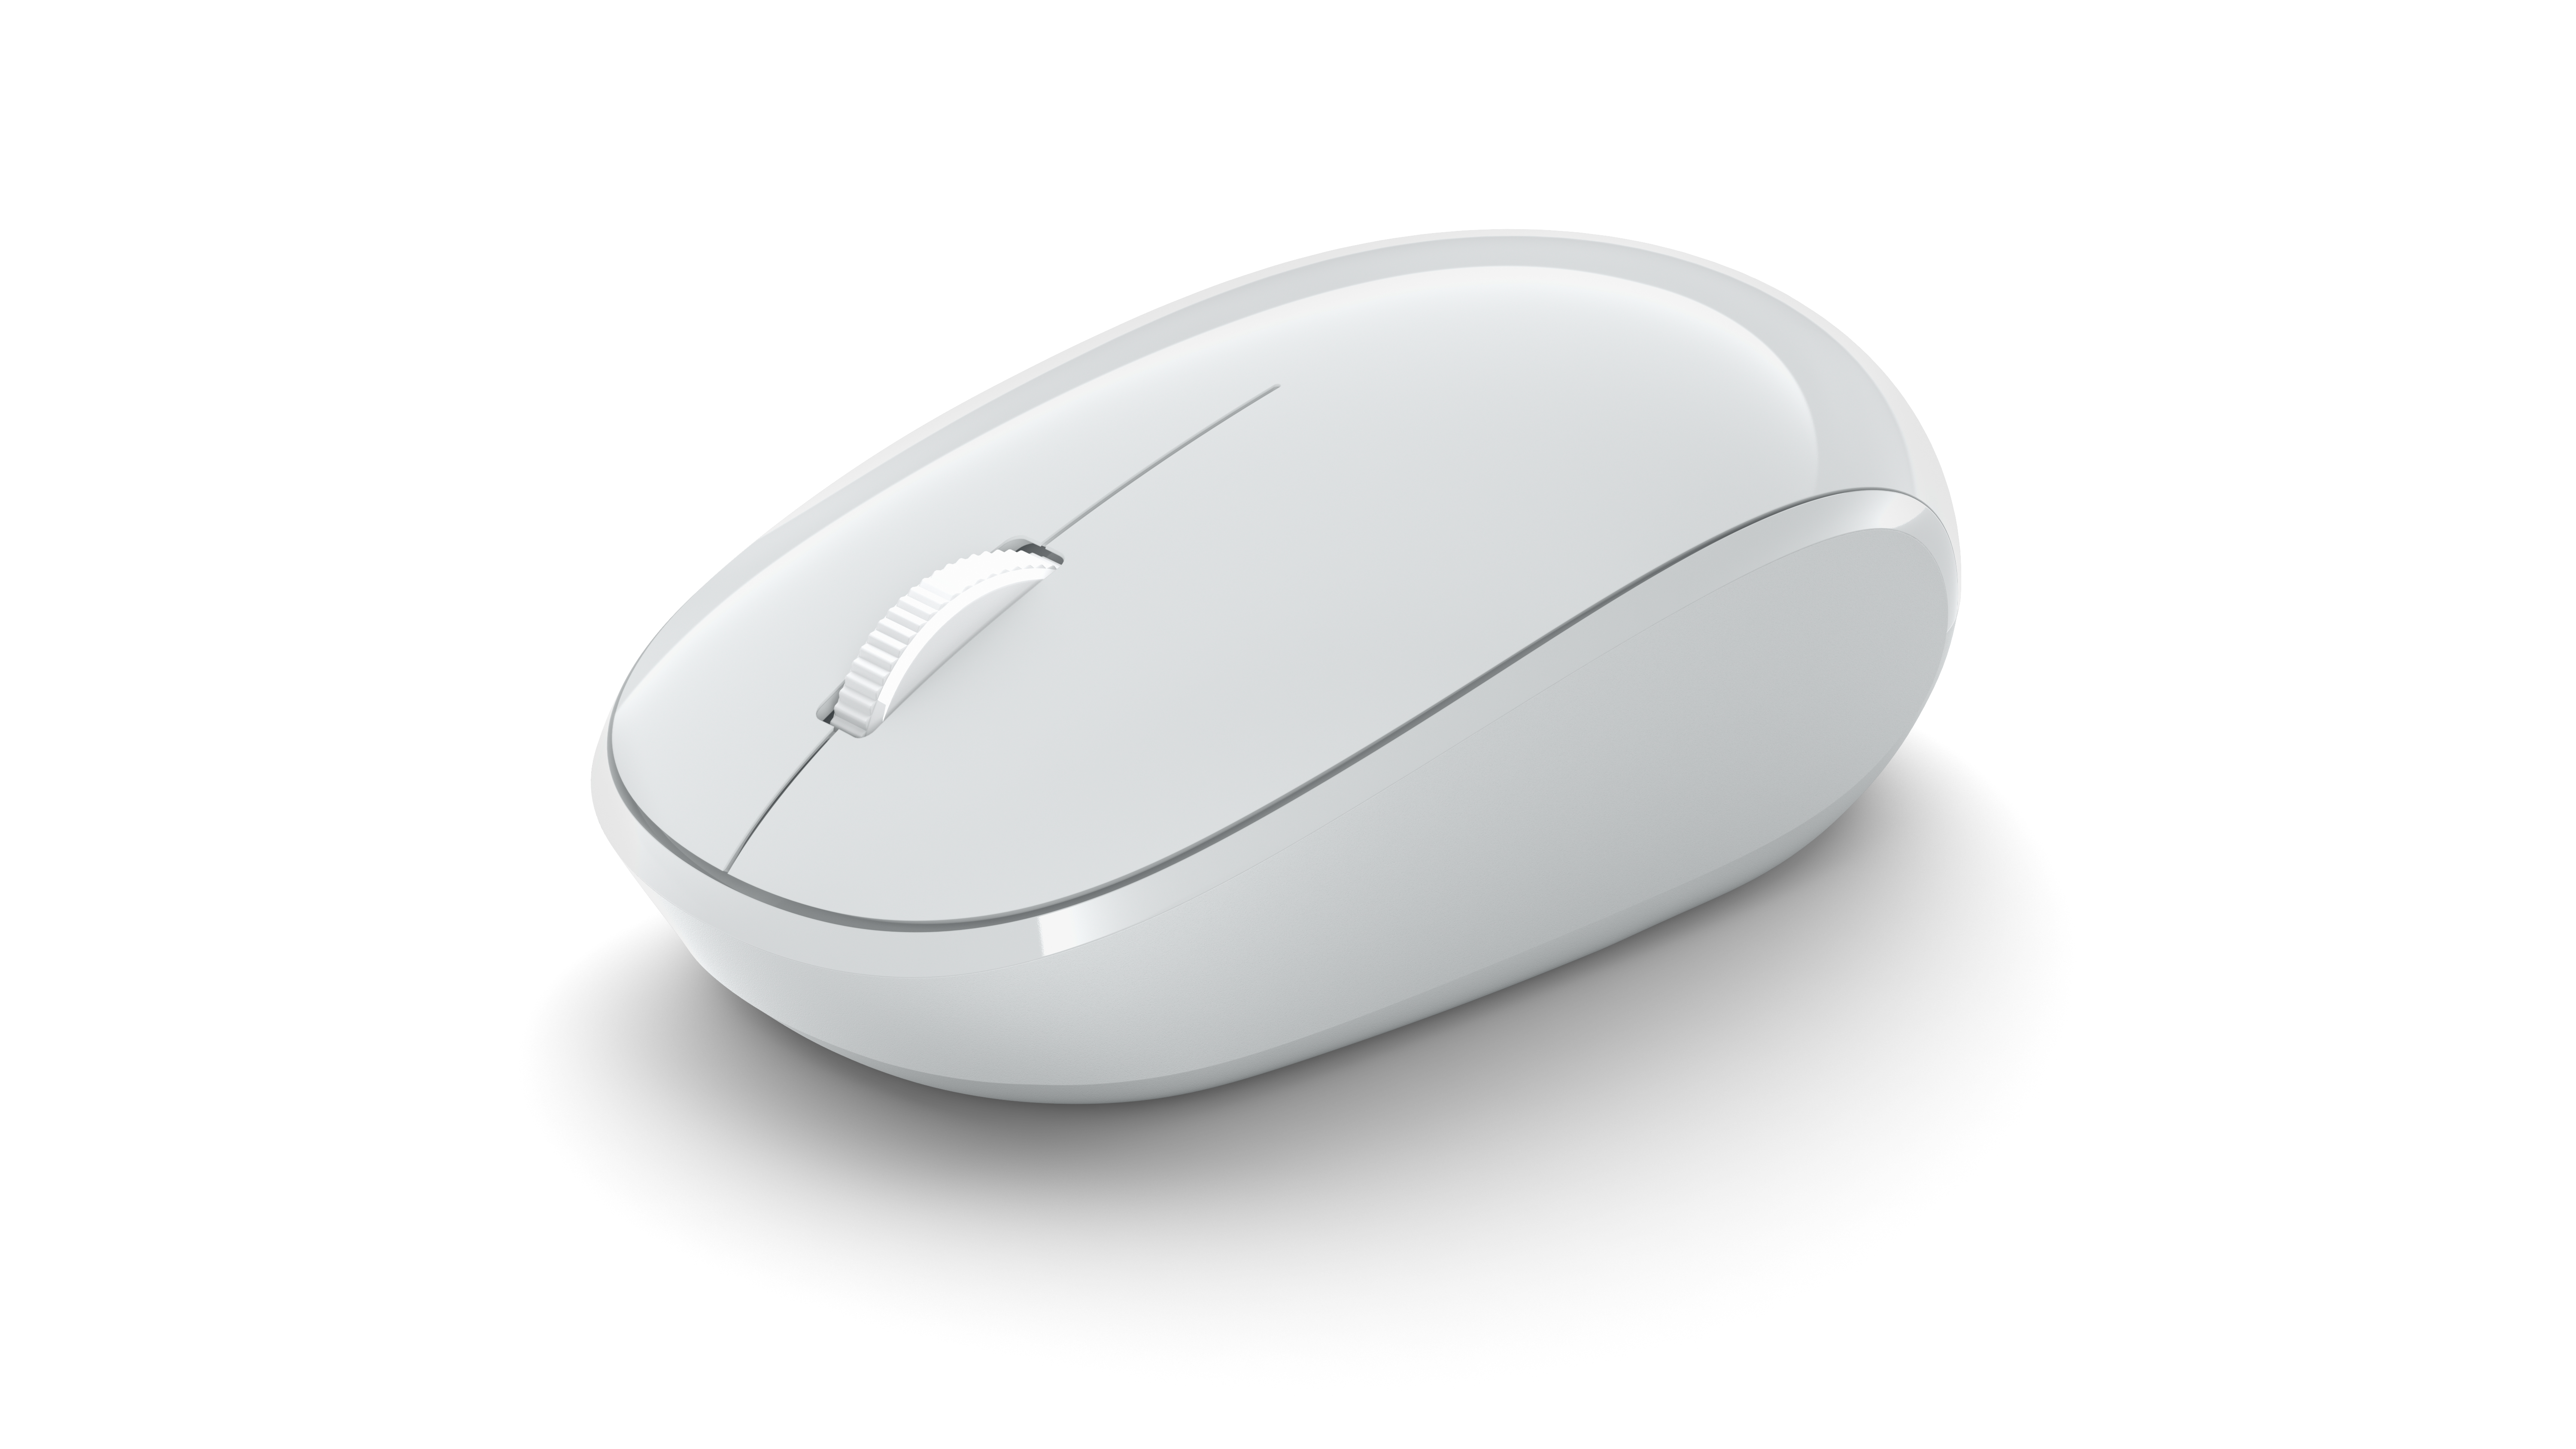 Mouse Bluetooth Microsoft Liaoning Monza Gris Rjn-00074